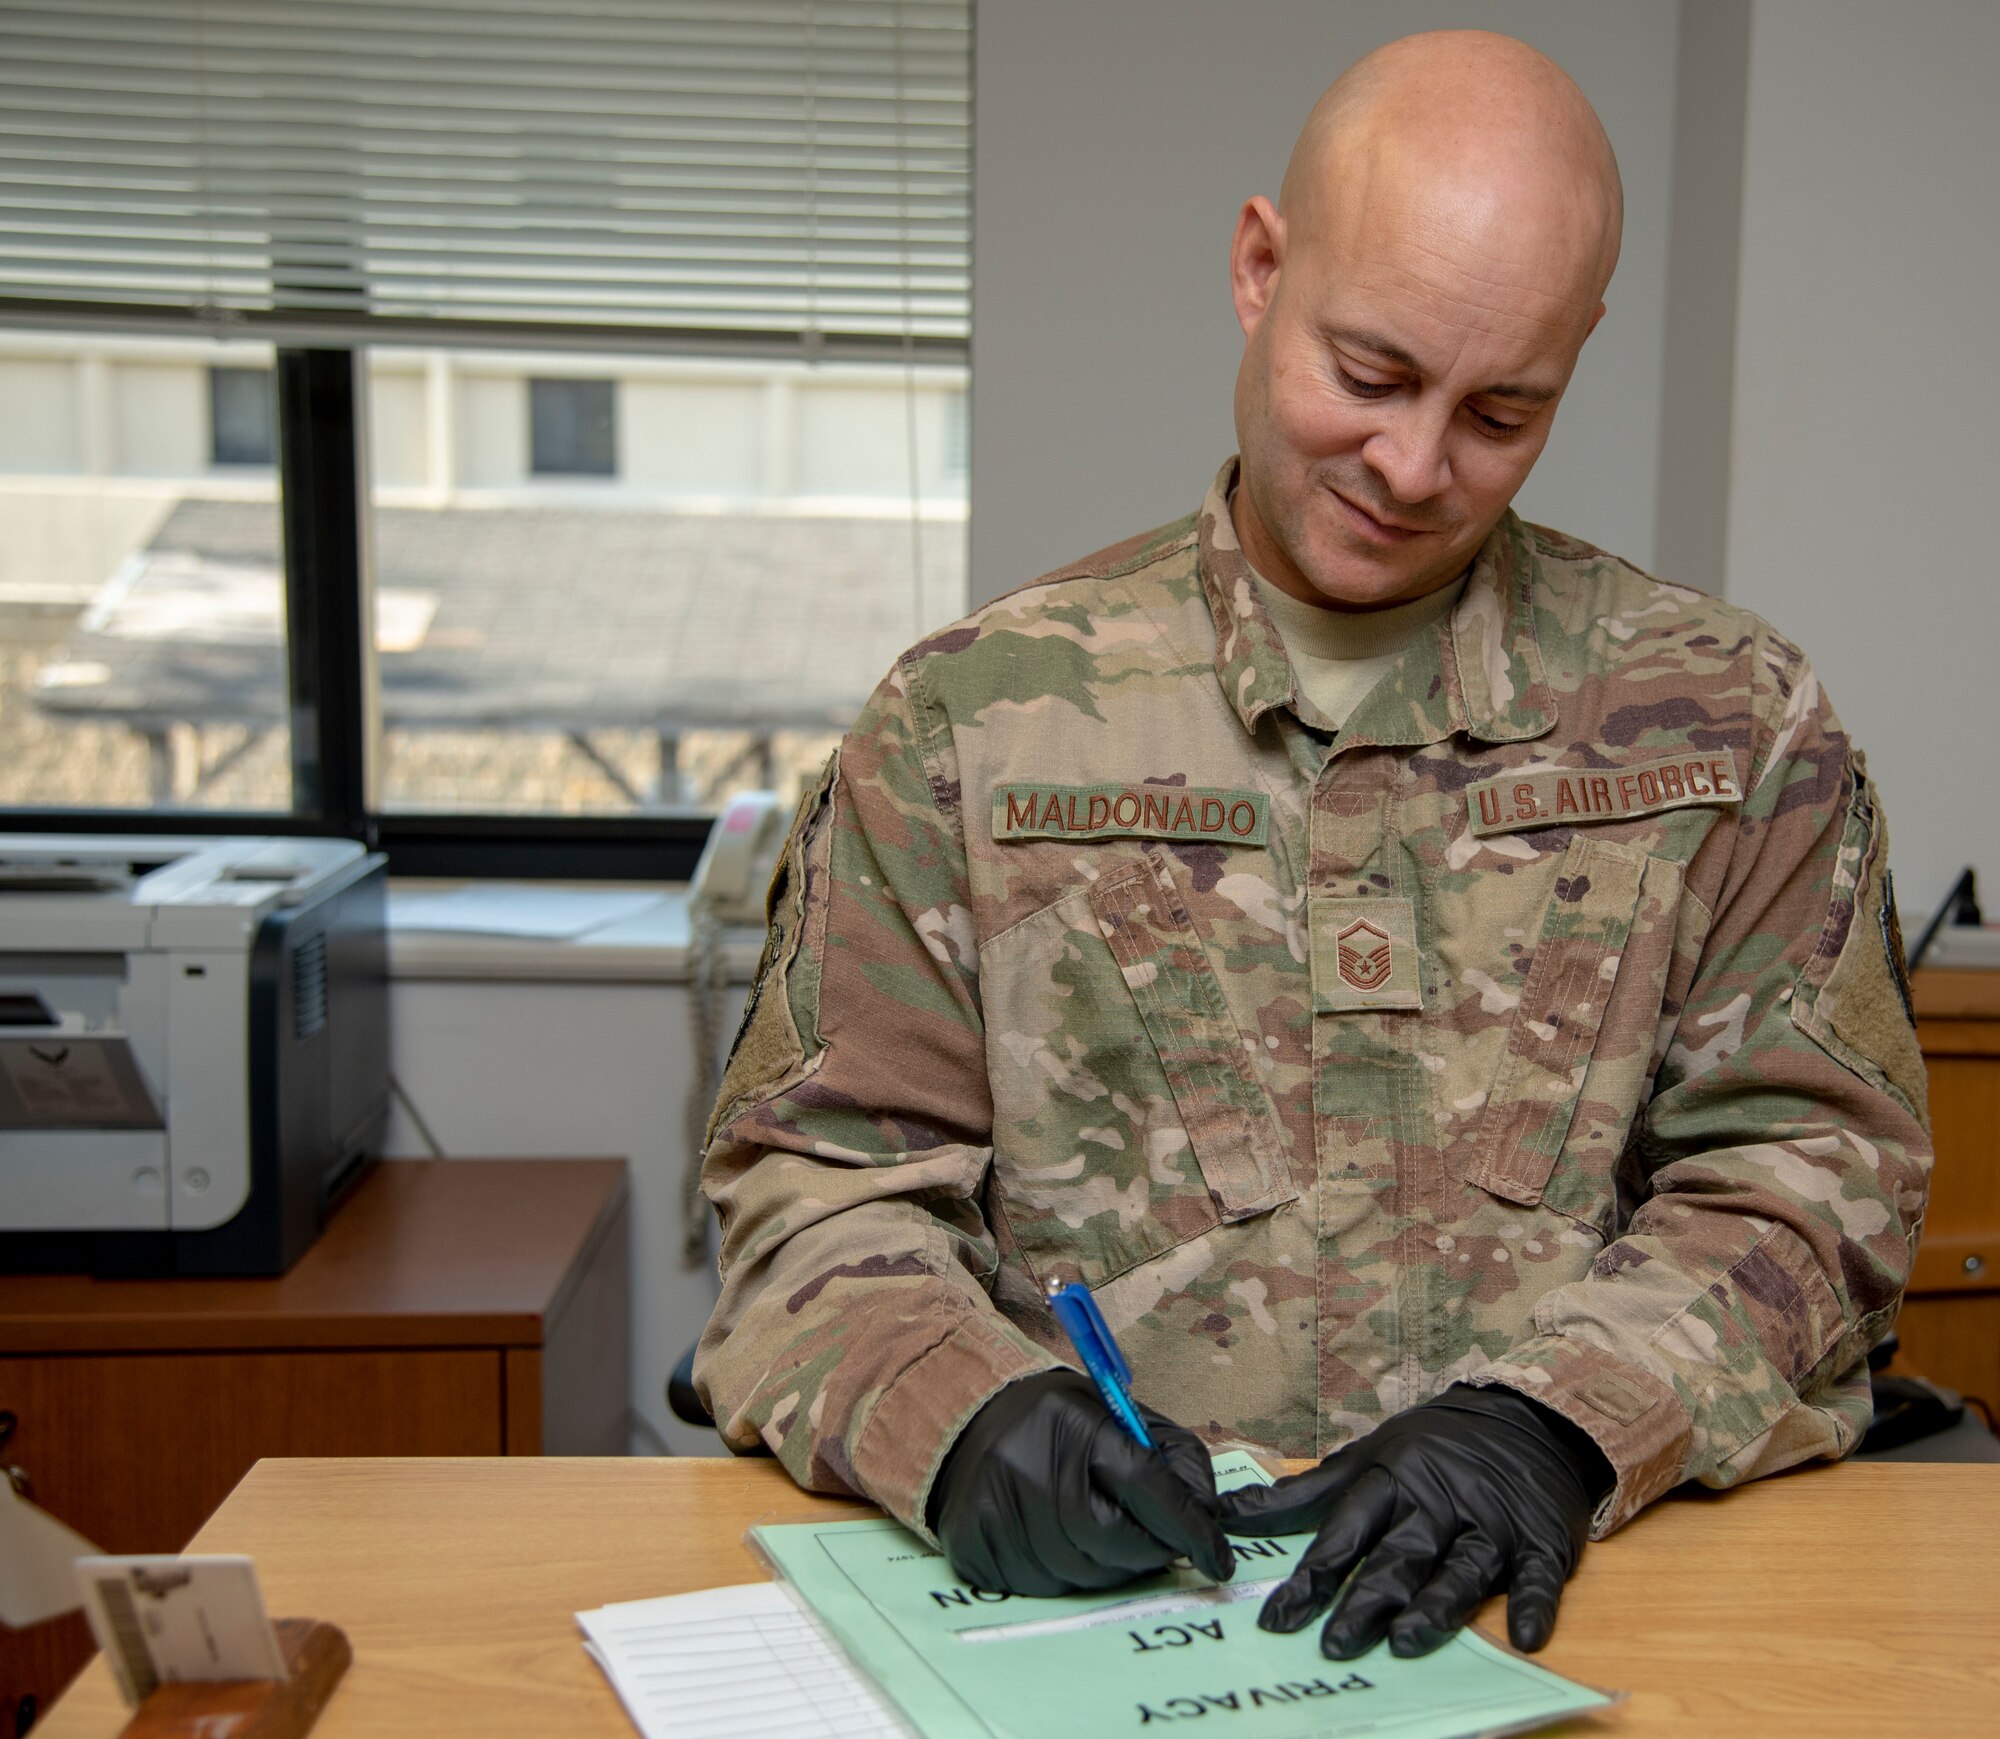 Master Sgt. Jason Maldonado, 436th Air Wing Drug Demand Reduction Program collector, signs an Airman in for testing November 8, 2019. All U.S. service members are subject to random urinalysis testing. (U.S. Air Force photo by Staff Sgt. Nicole Leidholm)